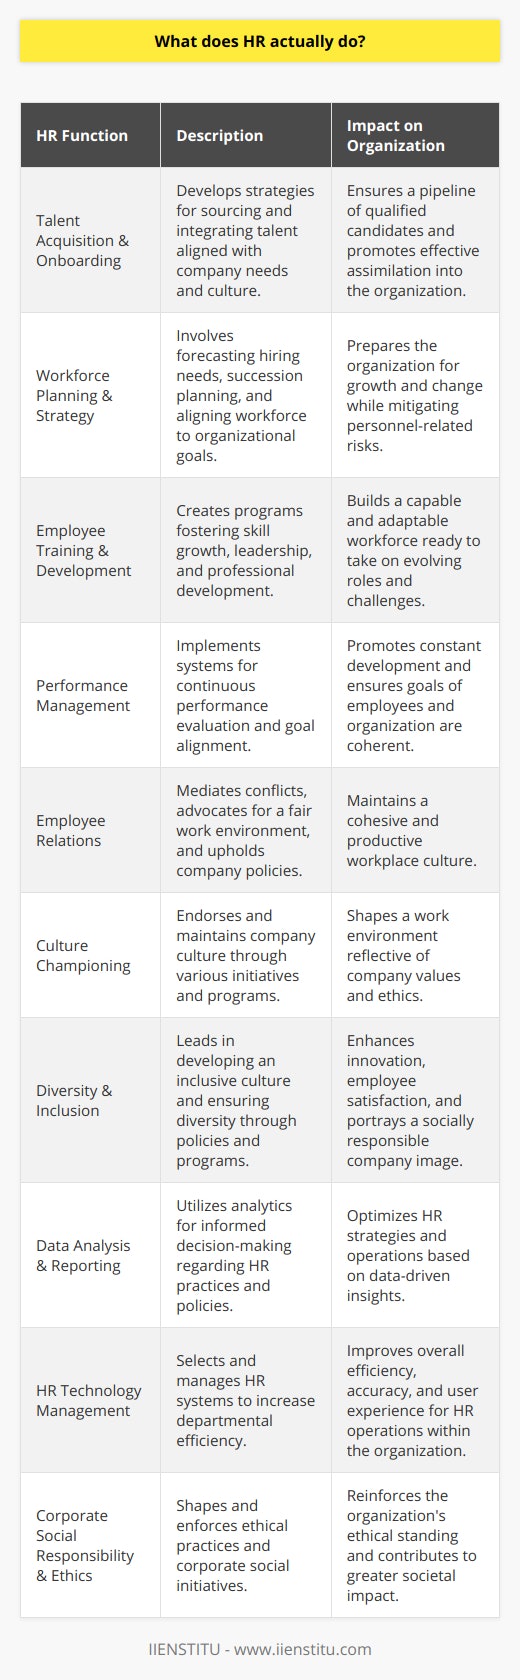 Human Resources, or HR, is a vital department within any organization, playing a multifaceted role that goes far beyond hiring and firing employees. It encompasses strategic planning and touches nearly every part of an organization. The following are the less commonly discussed, yet highly significant functions and responsibilities that HR fulfills:Talent Acquisition and OnboardingContrary to the simplistic notion that HR merely posts job adverts, the recruitment aspect of HR involves a nuanced strategy of talent acquisition. HR professionals must understand the dynamics of the job market, identify the skills needed for specific positions, and employ techniques such as behavioral interviewing to evaluate candidates' potential. Onboarding is another critical function where HR ensures new hires are smoothly and effectively integrated into the company culture and equipped with the necessary knowledge to succeed in their roles.Workforce Planning and StrategyHR is responsible for workforce planning, which includes predicting future hiring needs, succession planning, and risk management for personnel-related issues. These professionals work closely with department heads to align the workforce with the organization's long-term goals. Through strategic HR endeavors, organizations are better prepared for expansion, technology adoption, and other transformative processes.Employee Training and DevelopmentOne rarely discussed element of HR is its role in creating comprehensive training programs and identifying employee development opportunities. Training programs are not only about compliance and procedures but also involve cultivating leadership skills, technological competencies, and other professional capabilities. HR's role in employee development is pivotal in preparing employees to take on larger roles within the company.Performance ManagementMore than just annual reviews, HR's role extends to devising performance management systems that support continuous improvement and provide regular, constructive feedback. HR is also responsible for aligning employees' personal goals with organizational objectives, ensuring a cohesive pursuit of business success.Employee RelationsHR acts as a mediator for workplace conflicts and advocates for a healthy work environment. A significant part of HR’s role is to preemptively address potential disputes and to foster an atmosphere of fairness. Additionally, HR oversees the creation of company policies that govern employee behavior and ensures these policies are communicated and upheld.Culture ChampioningOne of HR's most critical, albeit less visible roles is being the custodian of company culture. They reinforce and uphold the values and behaviors that define the way an organization operates. HR initiatives in this space can include anything from organizing team-building activities to implementing recognition programs that reflect the company's core values.Diversity and InclusionHR has a leading role in driving diversity initiatives and promoting inclusiveness within the organization. This includes creating and enforcing policies that prevent discrimination and developing programs that celebrate diversity. A strong HR department is instrumental in cultivating an environment that values diverse perspectives and fosters equality.Data Analysis and ReportingModern HR departments are data-driven, leveraging employee data to make informed decisions on hiring, compensation, promotions, turnover, and employee satisfaction. HR analytics is an emerging field within human resource management that uses data analysis to improve employee performance and retention.HR Technology ManagementAn often overlooked aspect of HR is its role in selecting and managing HR technologies such as Human Resource Information Systems (HRIS) or Applicant Tracking Systems (ATS). These tools are critical in streamlining HR processes and improving efficiency within the department.Corporate Social Responsibility and EthicsFinally, HR has a hand in shaping the ethical framework of an organization. From creating codes of conduct to implementing corporate social responsibility initiatives, HR contributes to the moral guidance of a company and ensures that ethical practices are followed at all levels.In conclusion, HR's responsibilities encompass a wide range of strategic and operational tasks that are pivotal to an organization’s health and its employees' well-being. The department's functions extend into areas that require insight into corporate strategy, psychology, law, ethics, and technology. Effective HR management is thus central not only to the workforce but to the very identity and performance of the organization itself.